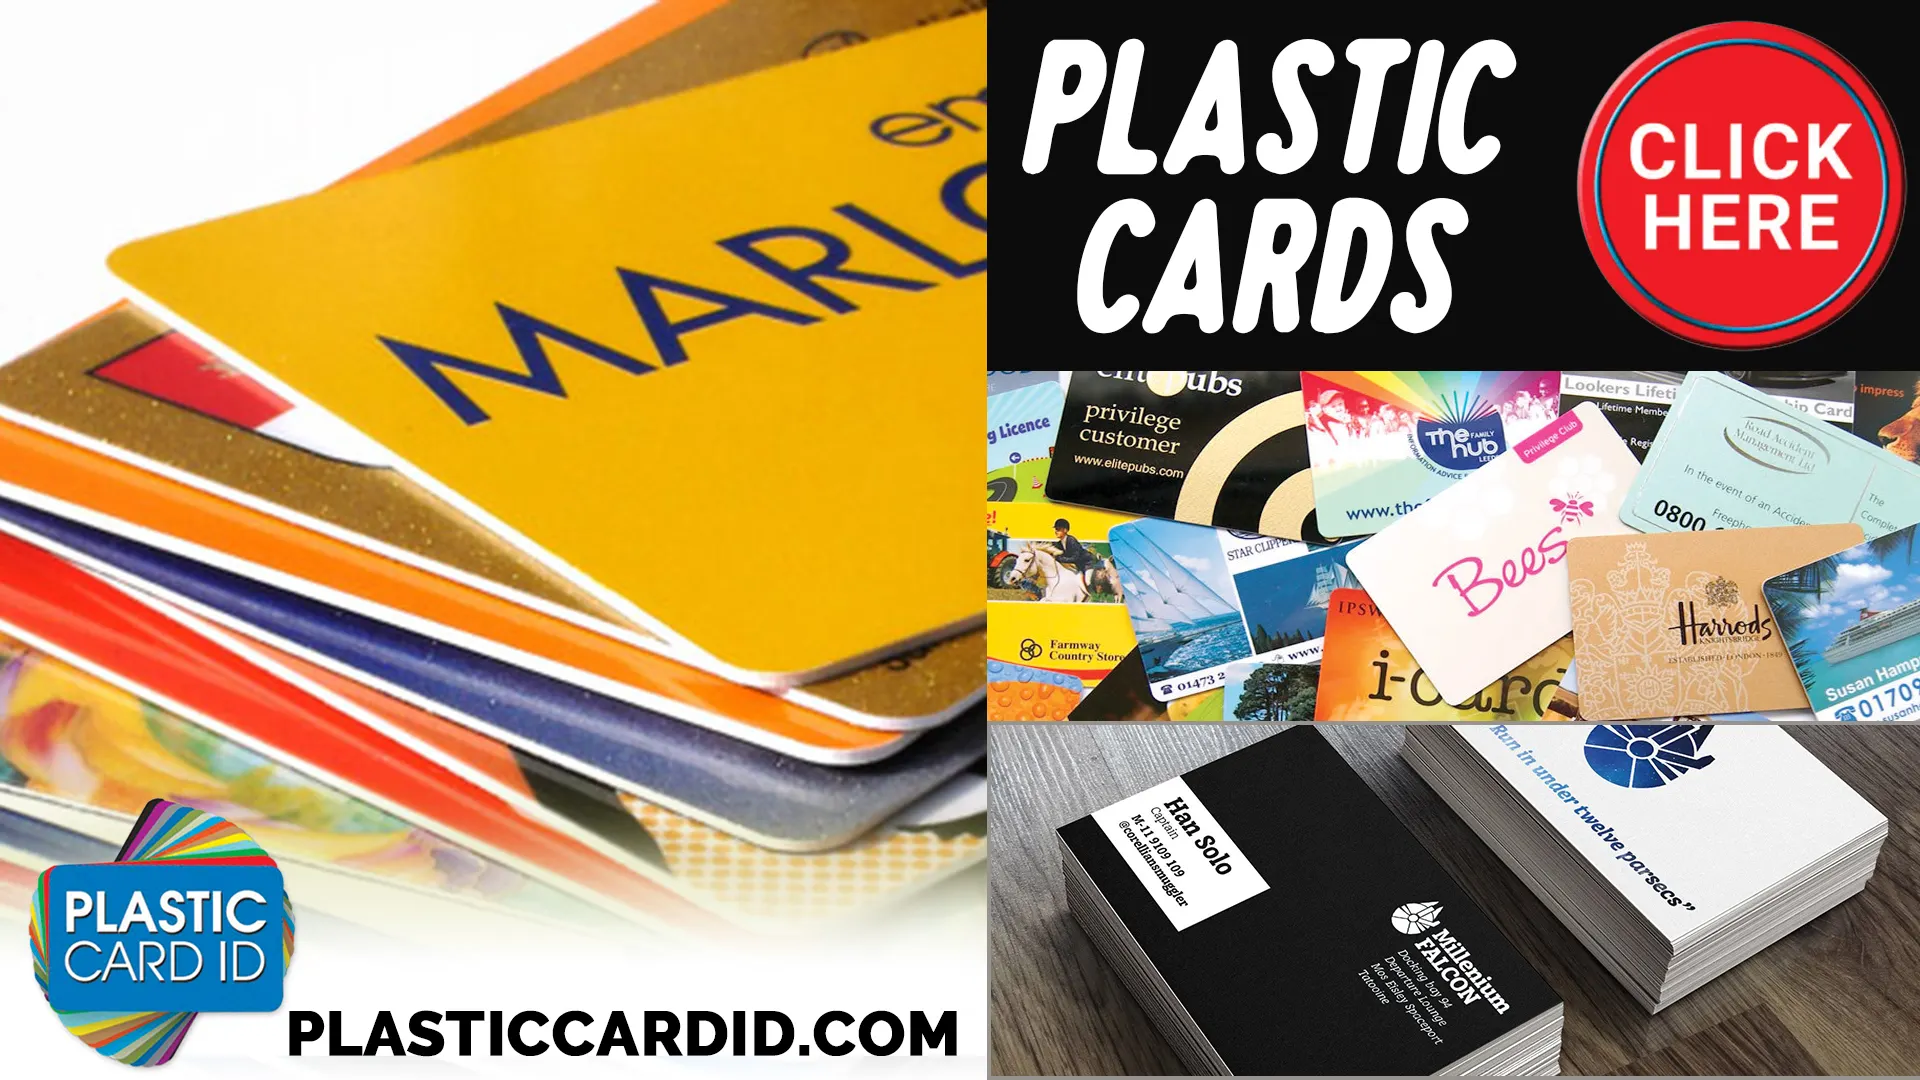 Making it Personal: Customization with Plastic Card ID
